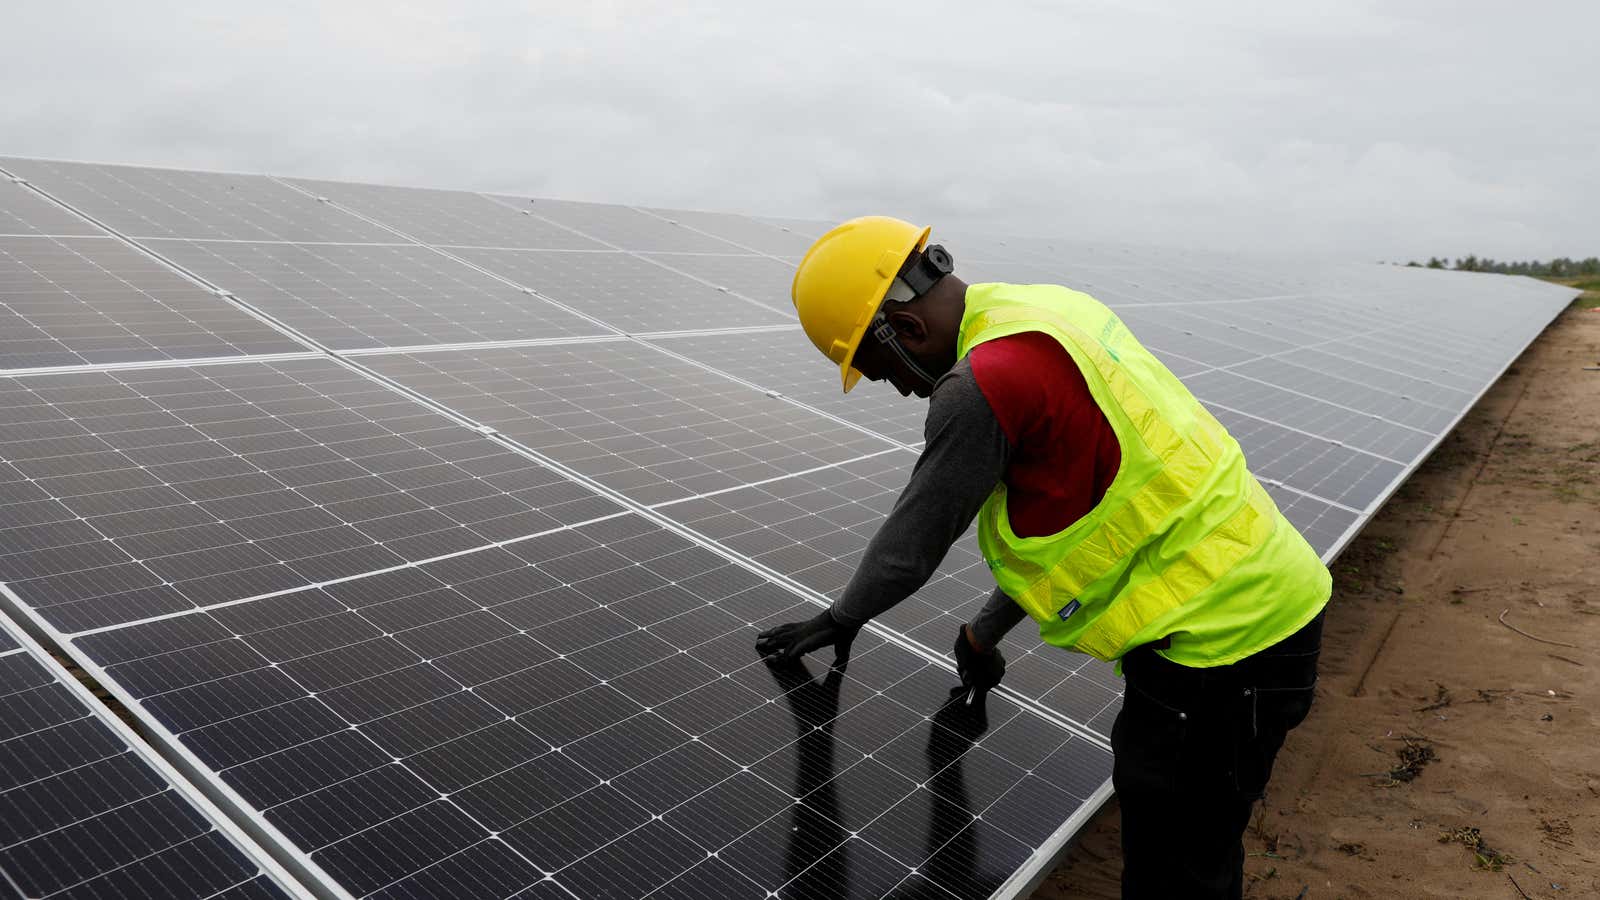 Shell bought Nigeria’s Daystar Power as a first push into African renewable energy